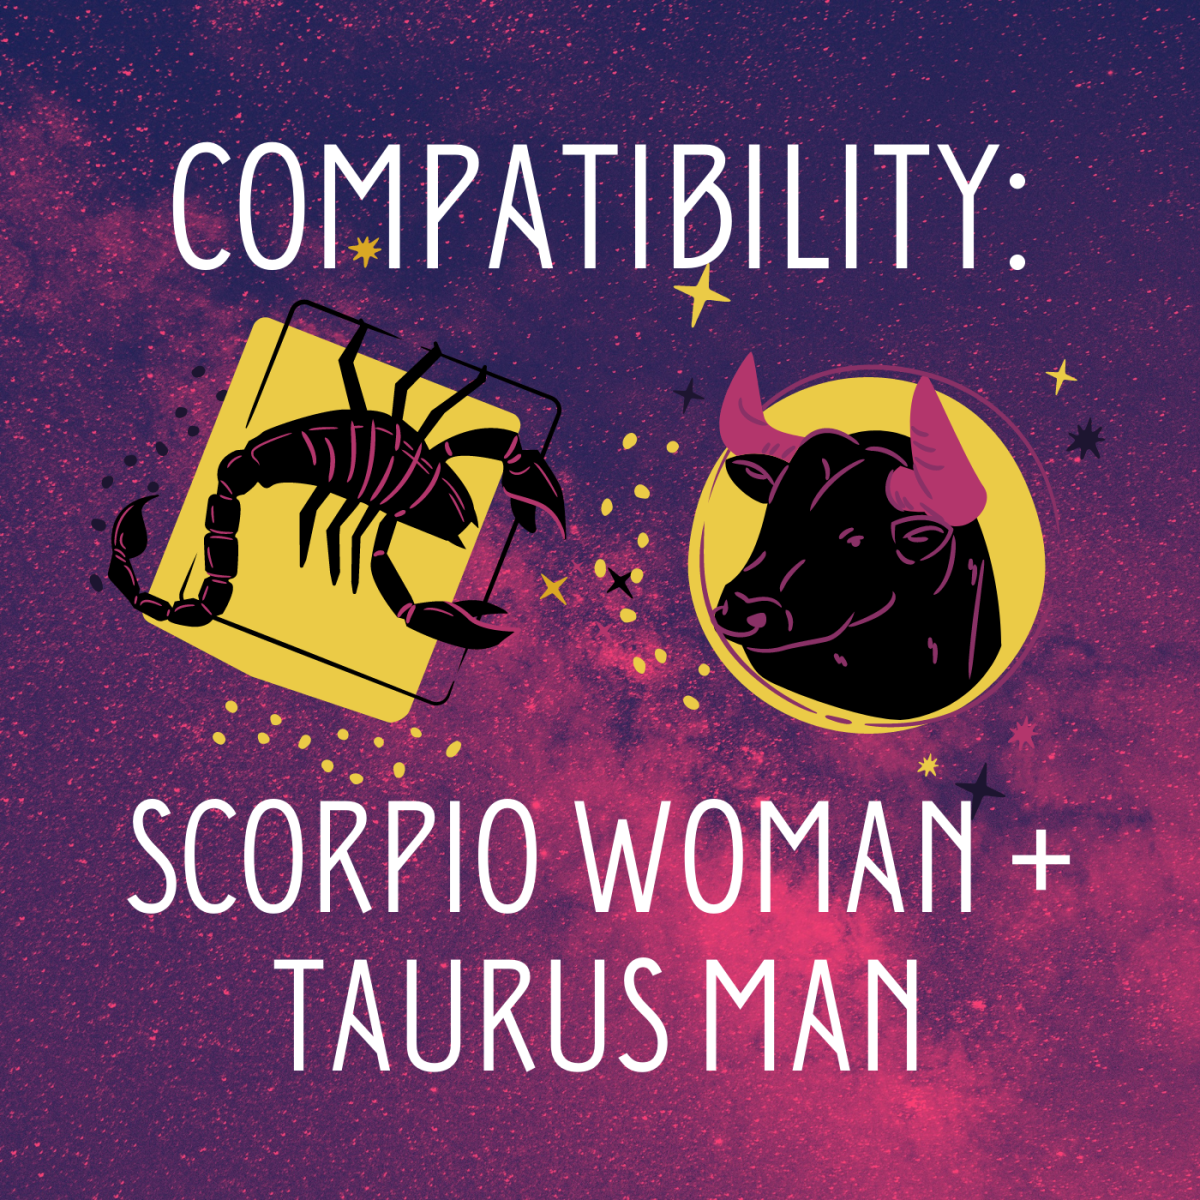 Can a Taurus man and a Scorpio woman really get along?